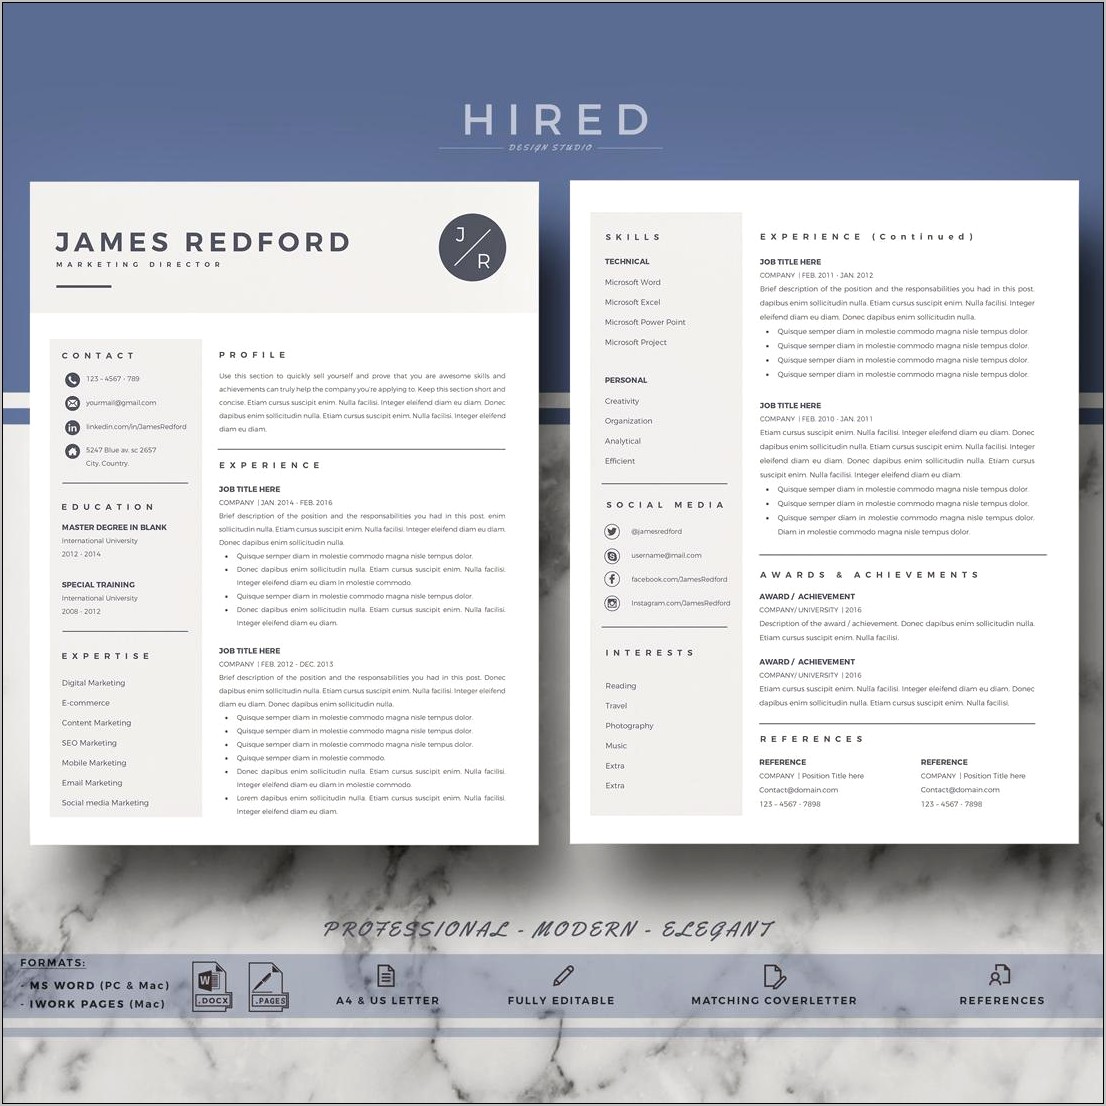 Sample References Page For Professional Resume